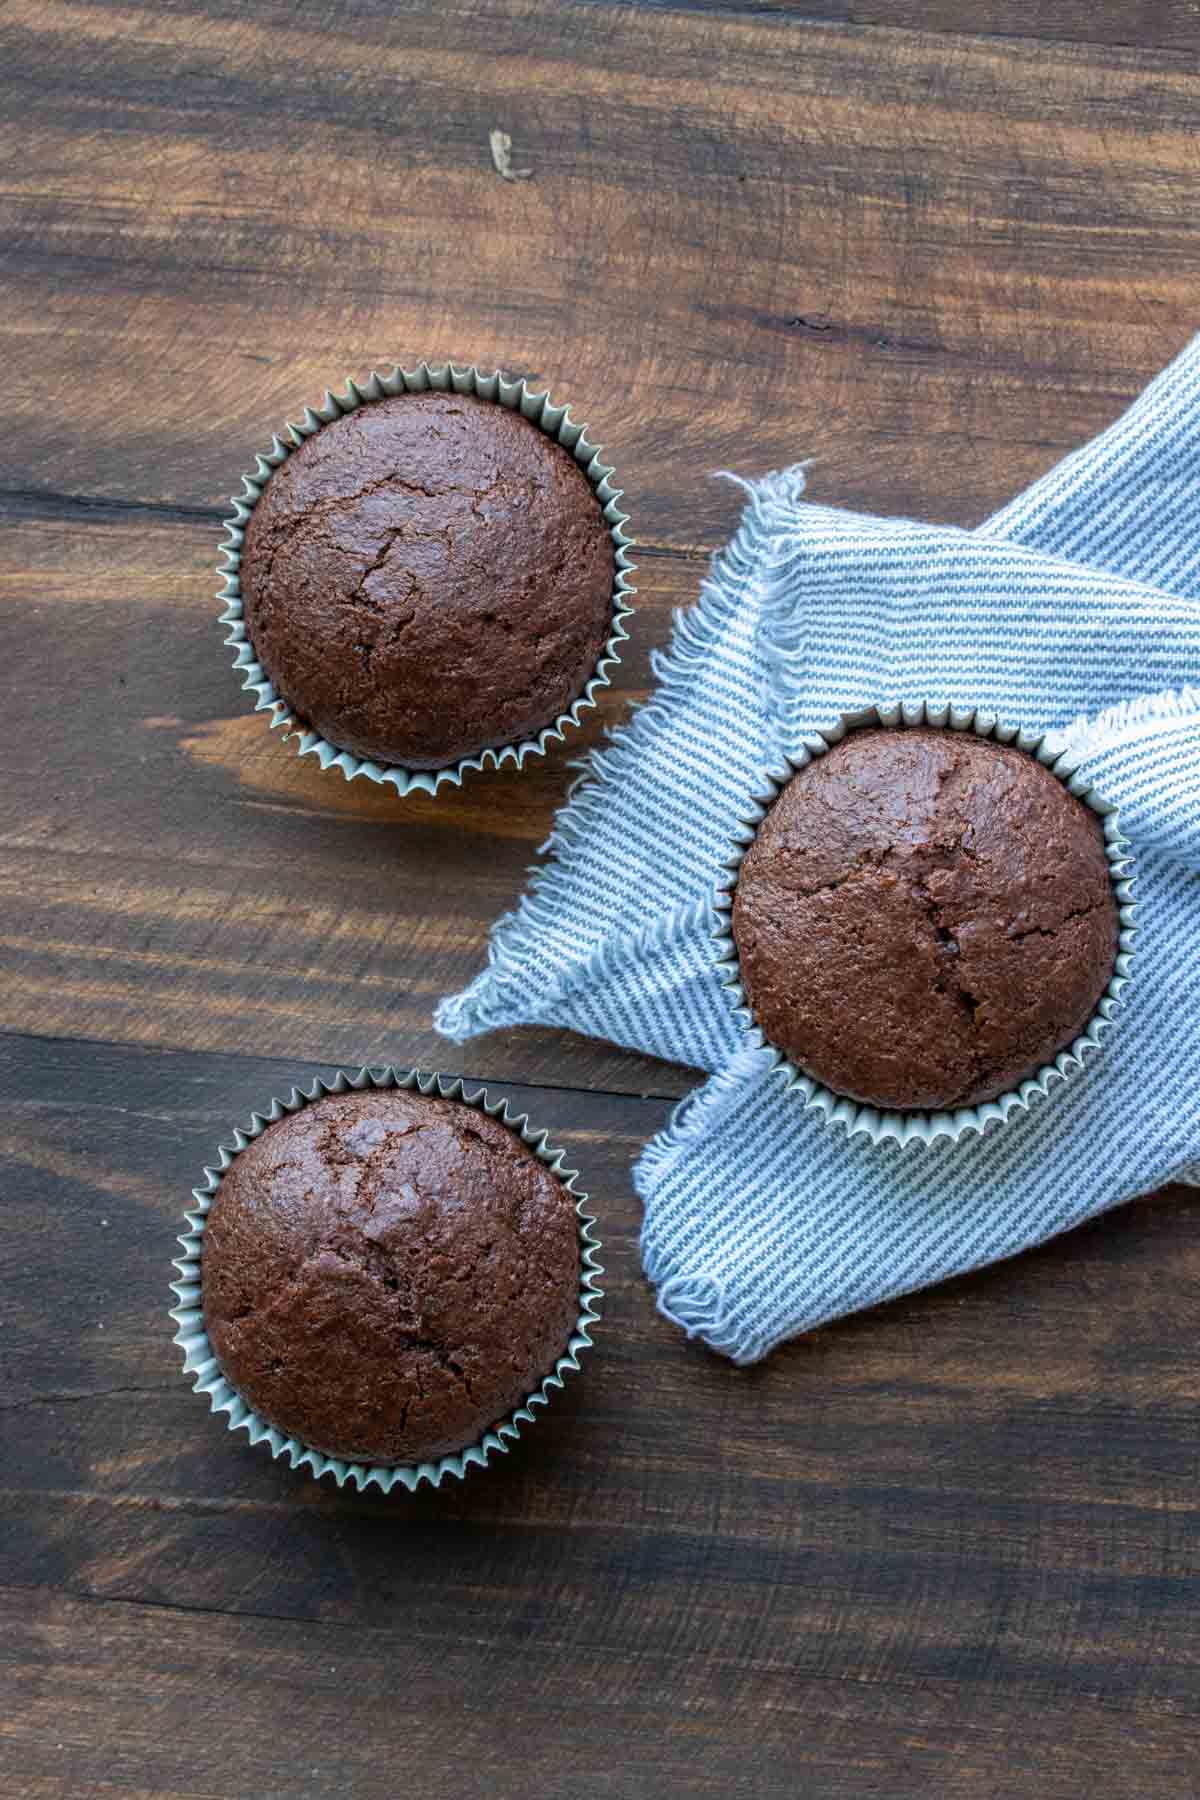 Three baked chocolate cupcakes on a wooden table